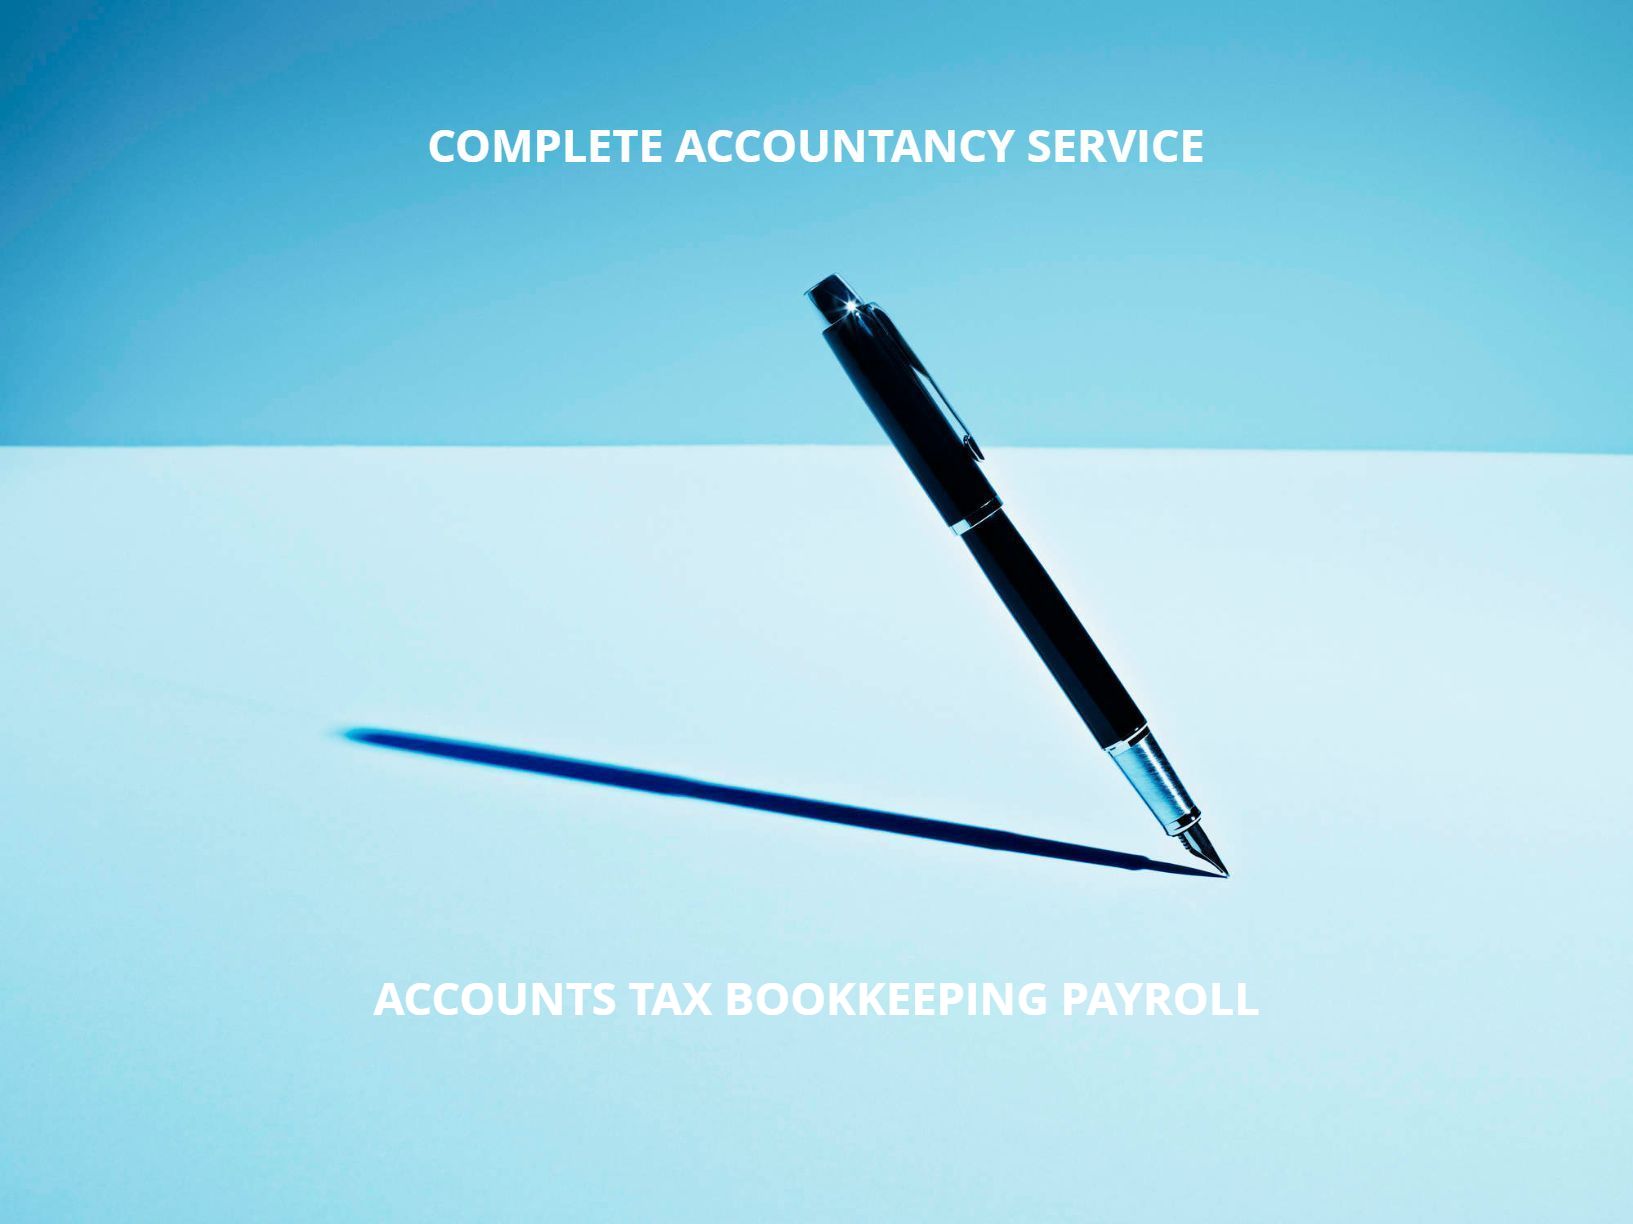 Complete accountancy service